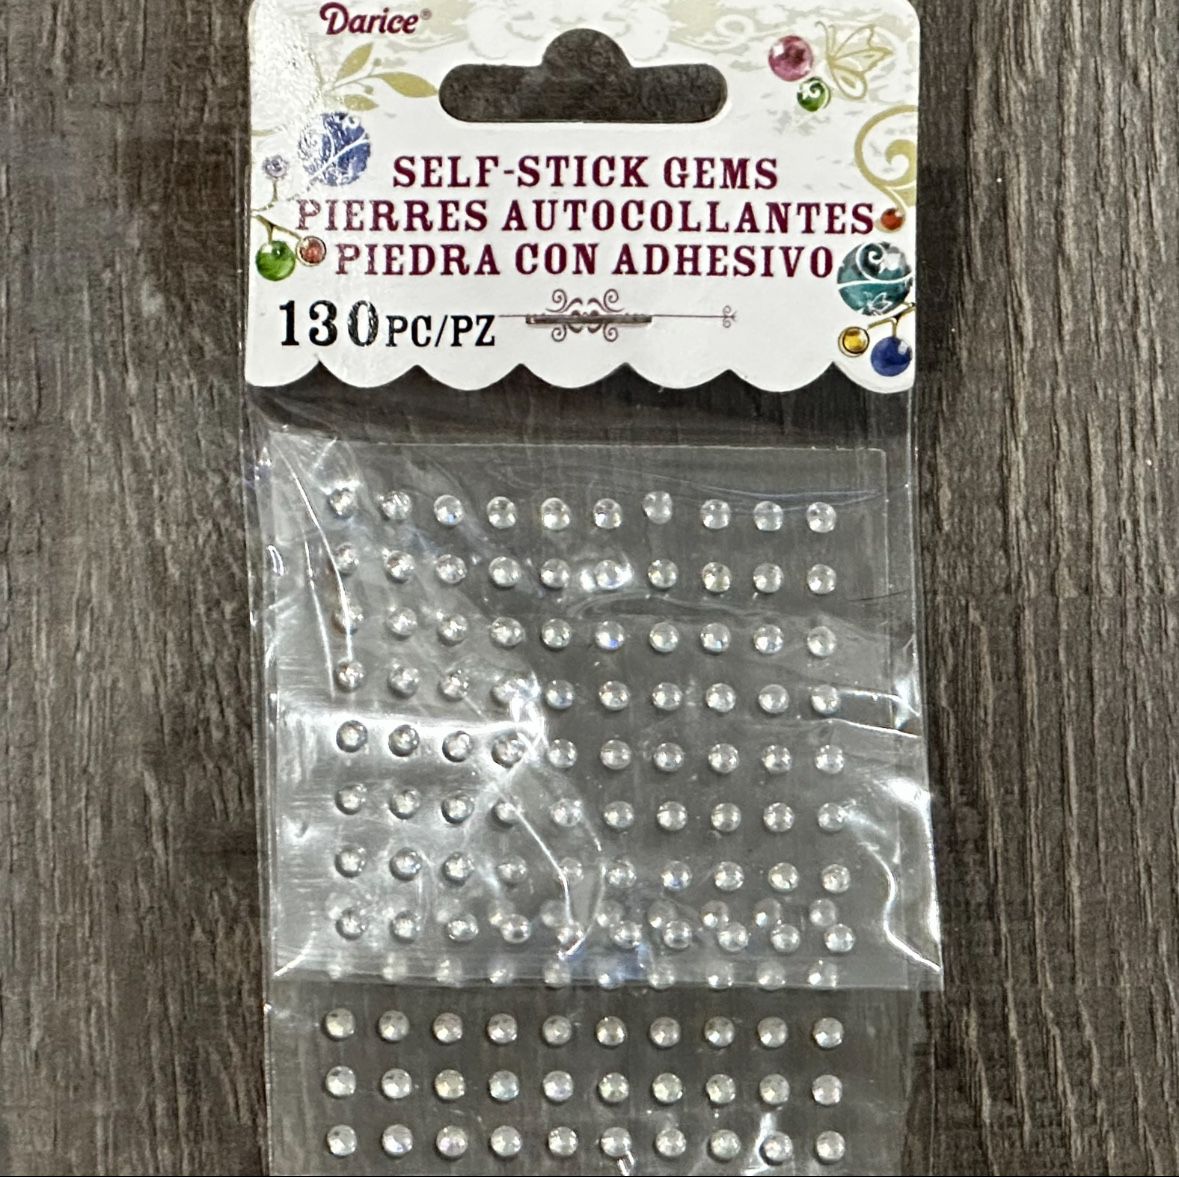 New Pack of 130 Self-Stick Gems Self-Adhesive Crafting Embellishments